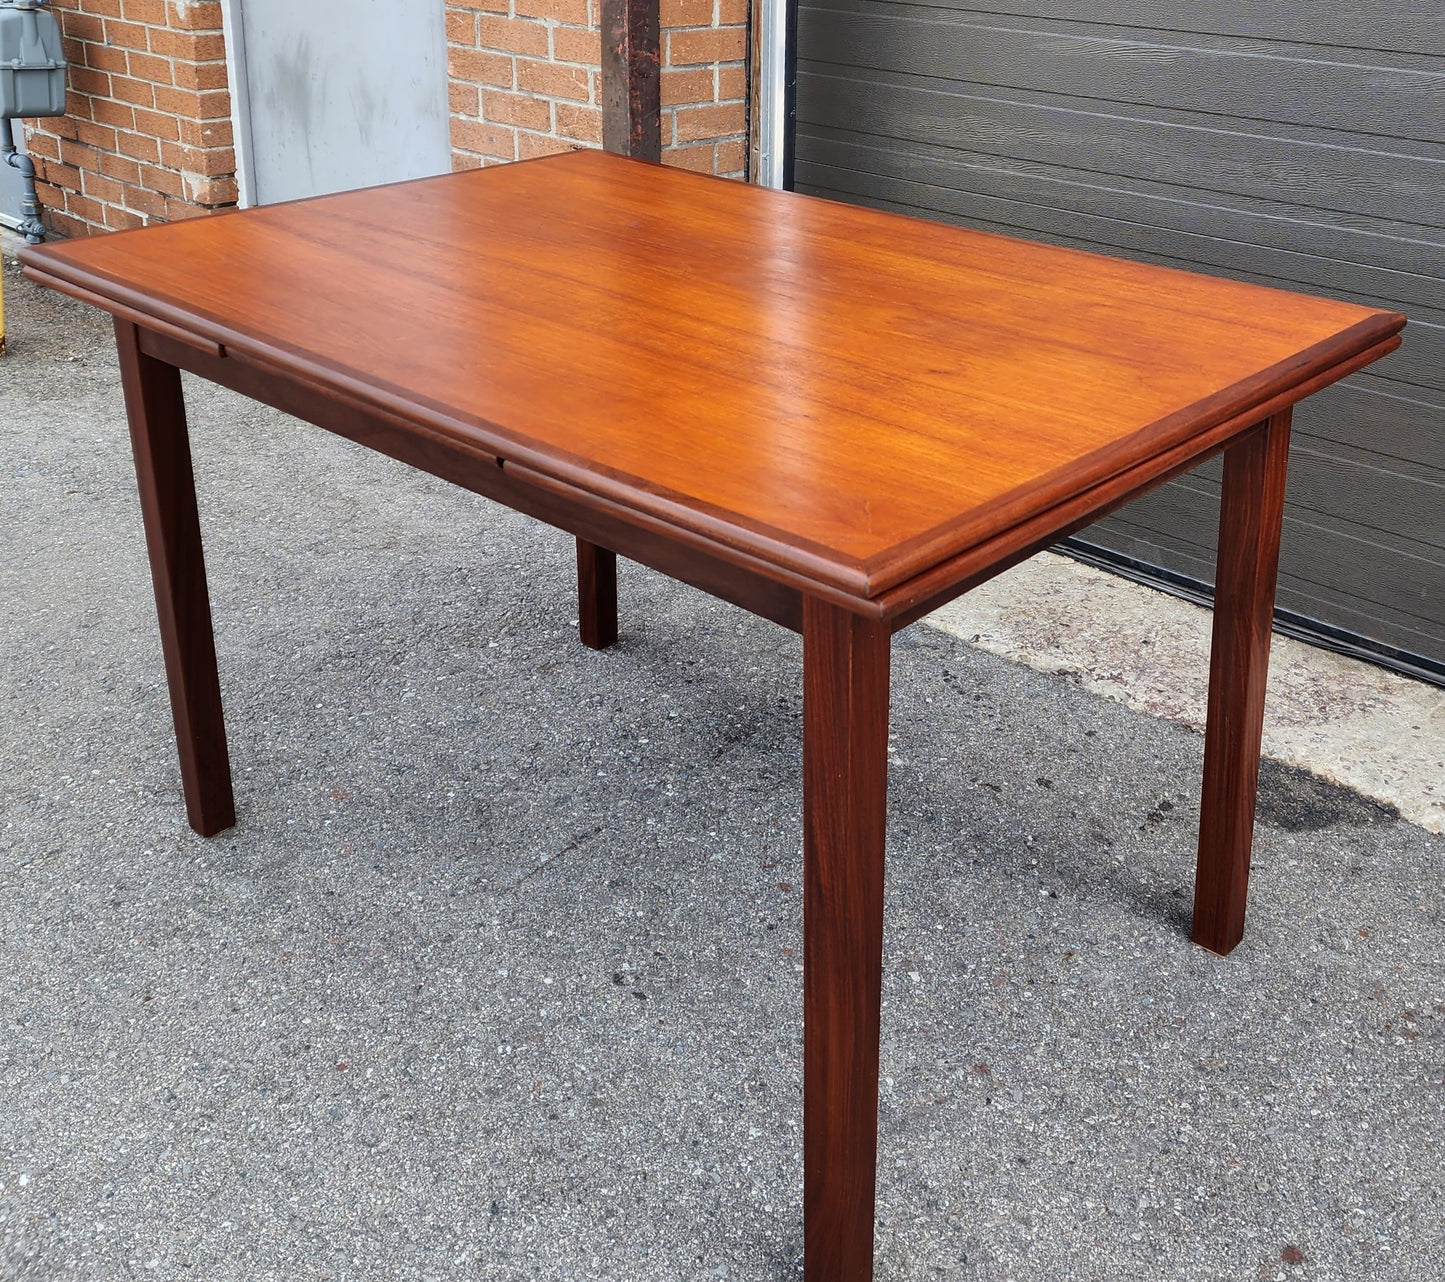 REFINISHED Mid Century Modern Teak Table Draw Leaf 51"-86" & 4 Chairs by RS Associates